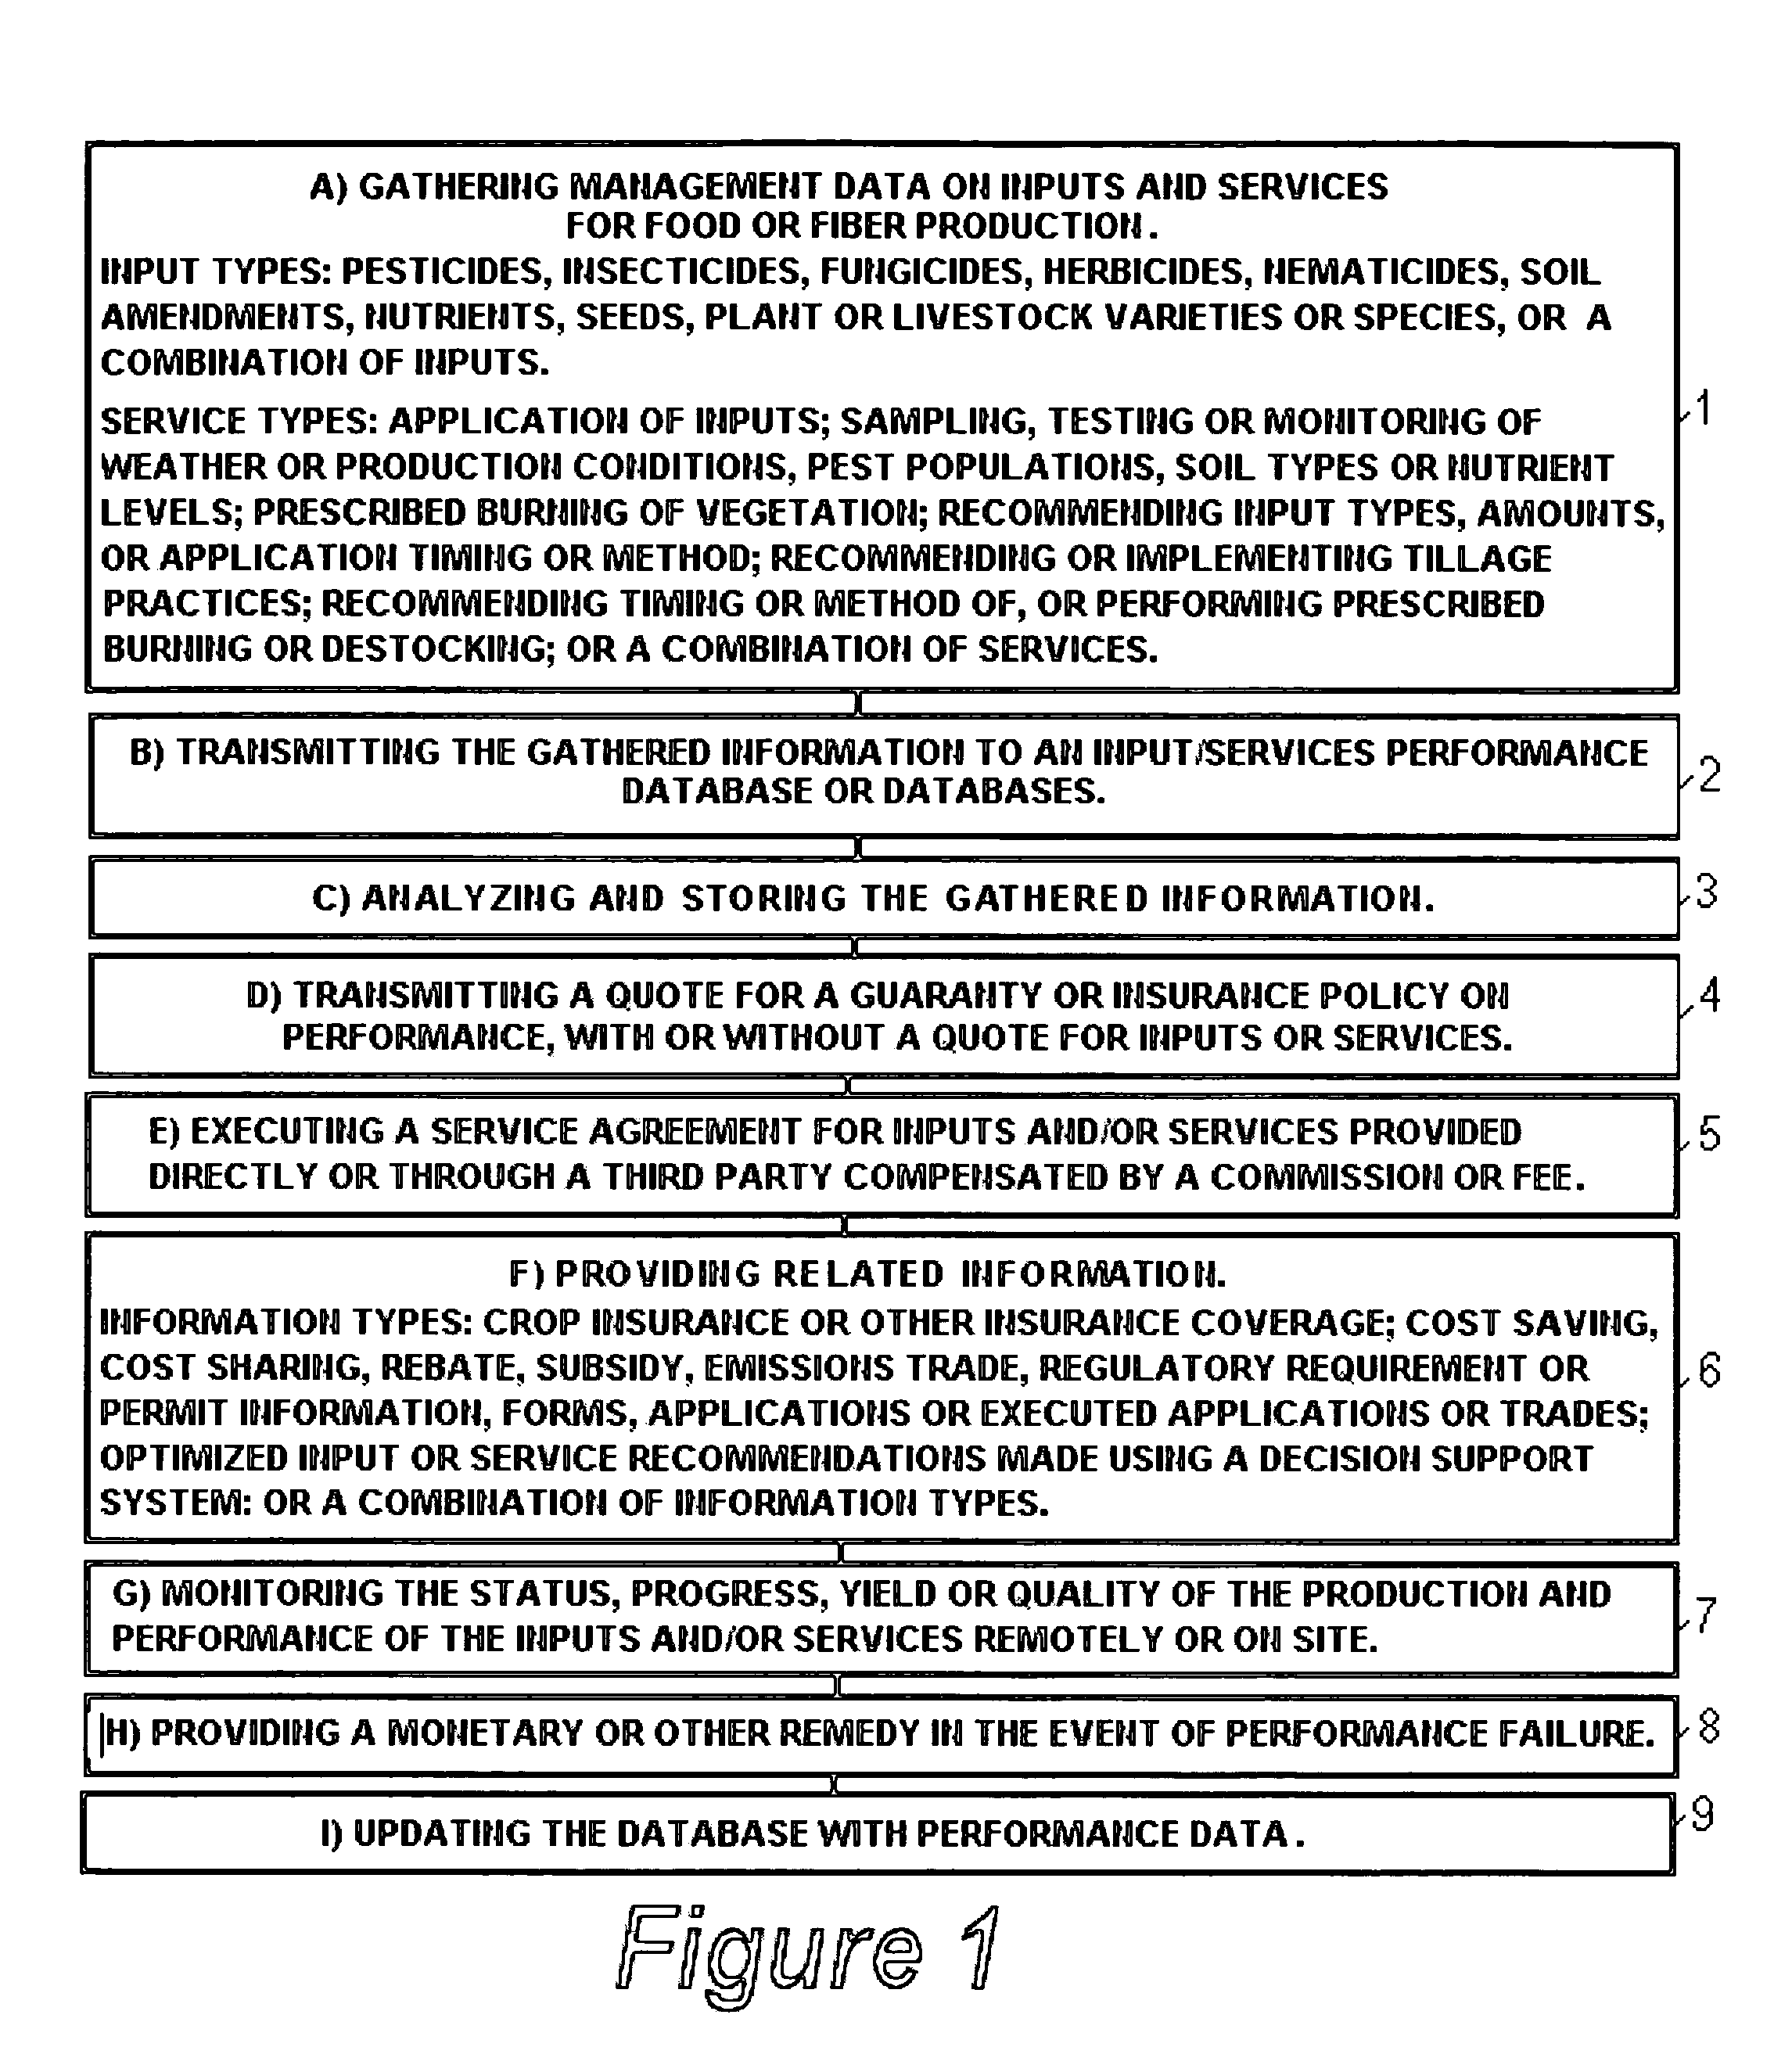 Method for quoting and contracting for management of inputs and services under a commercial service agreement, with a service loss guaranty or insurance policy and using an information management system